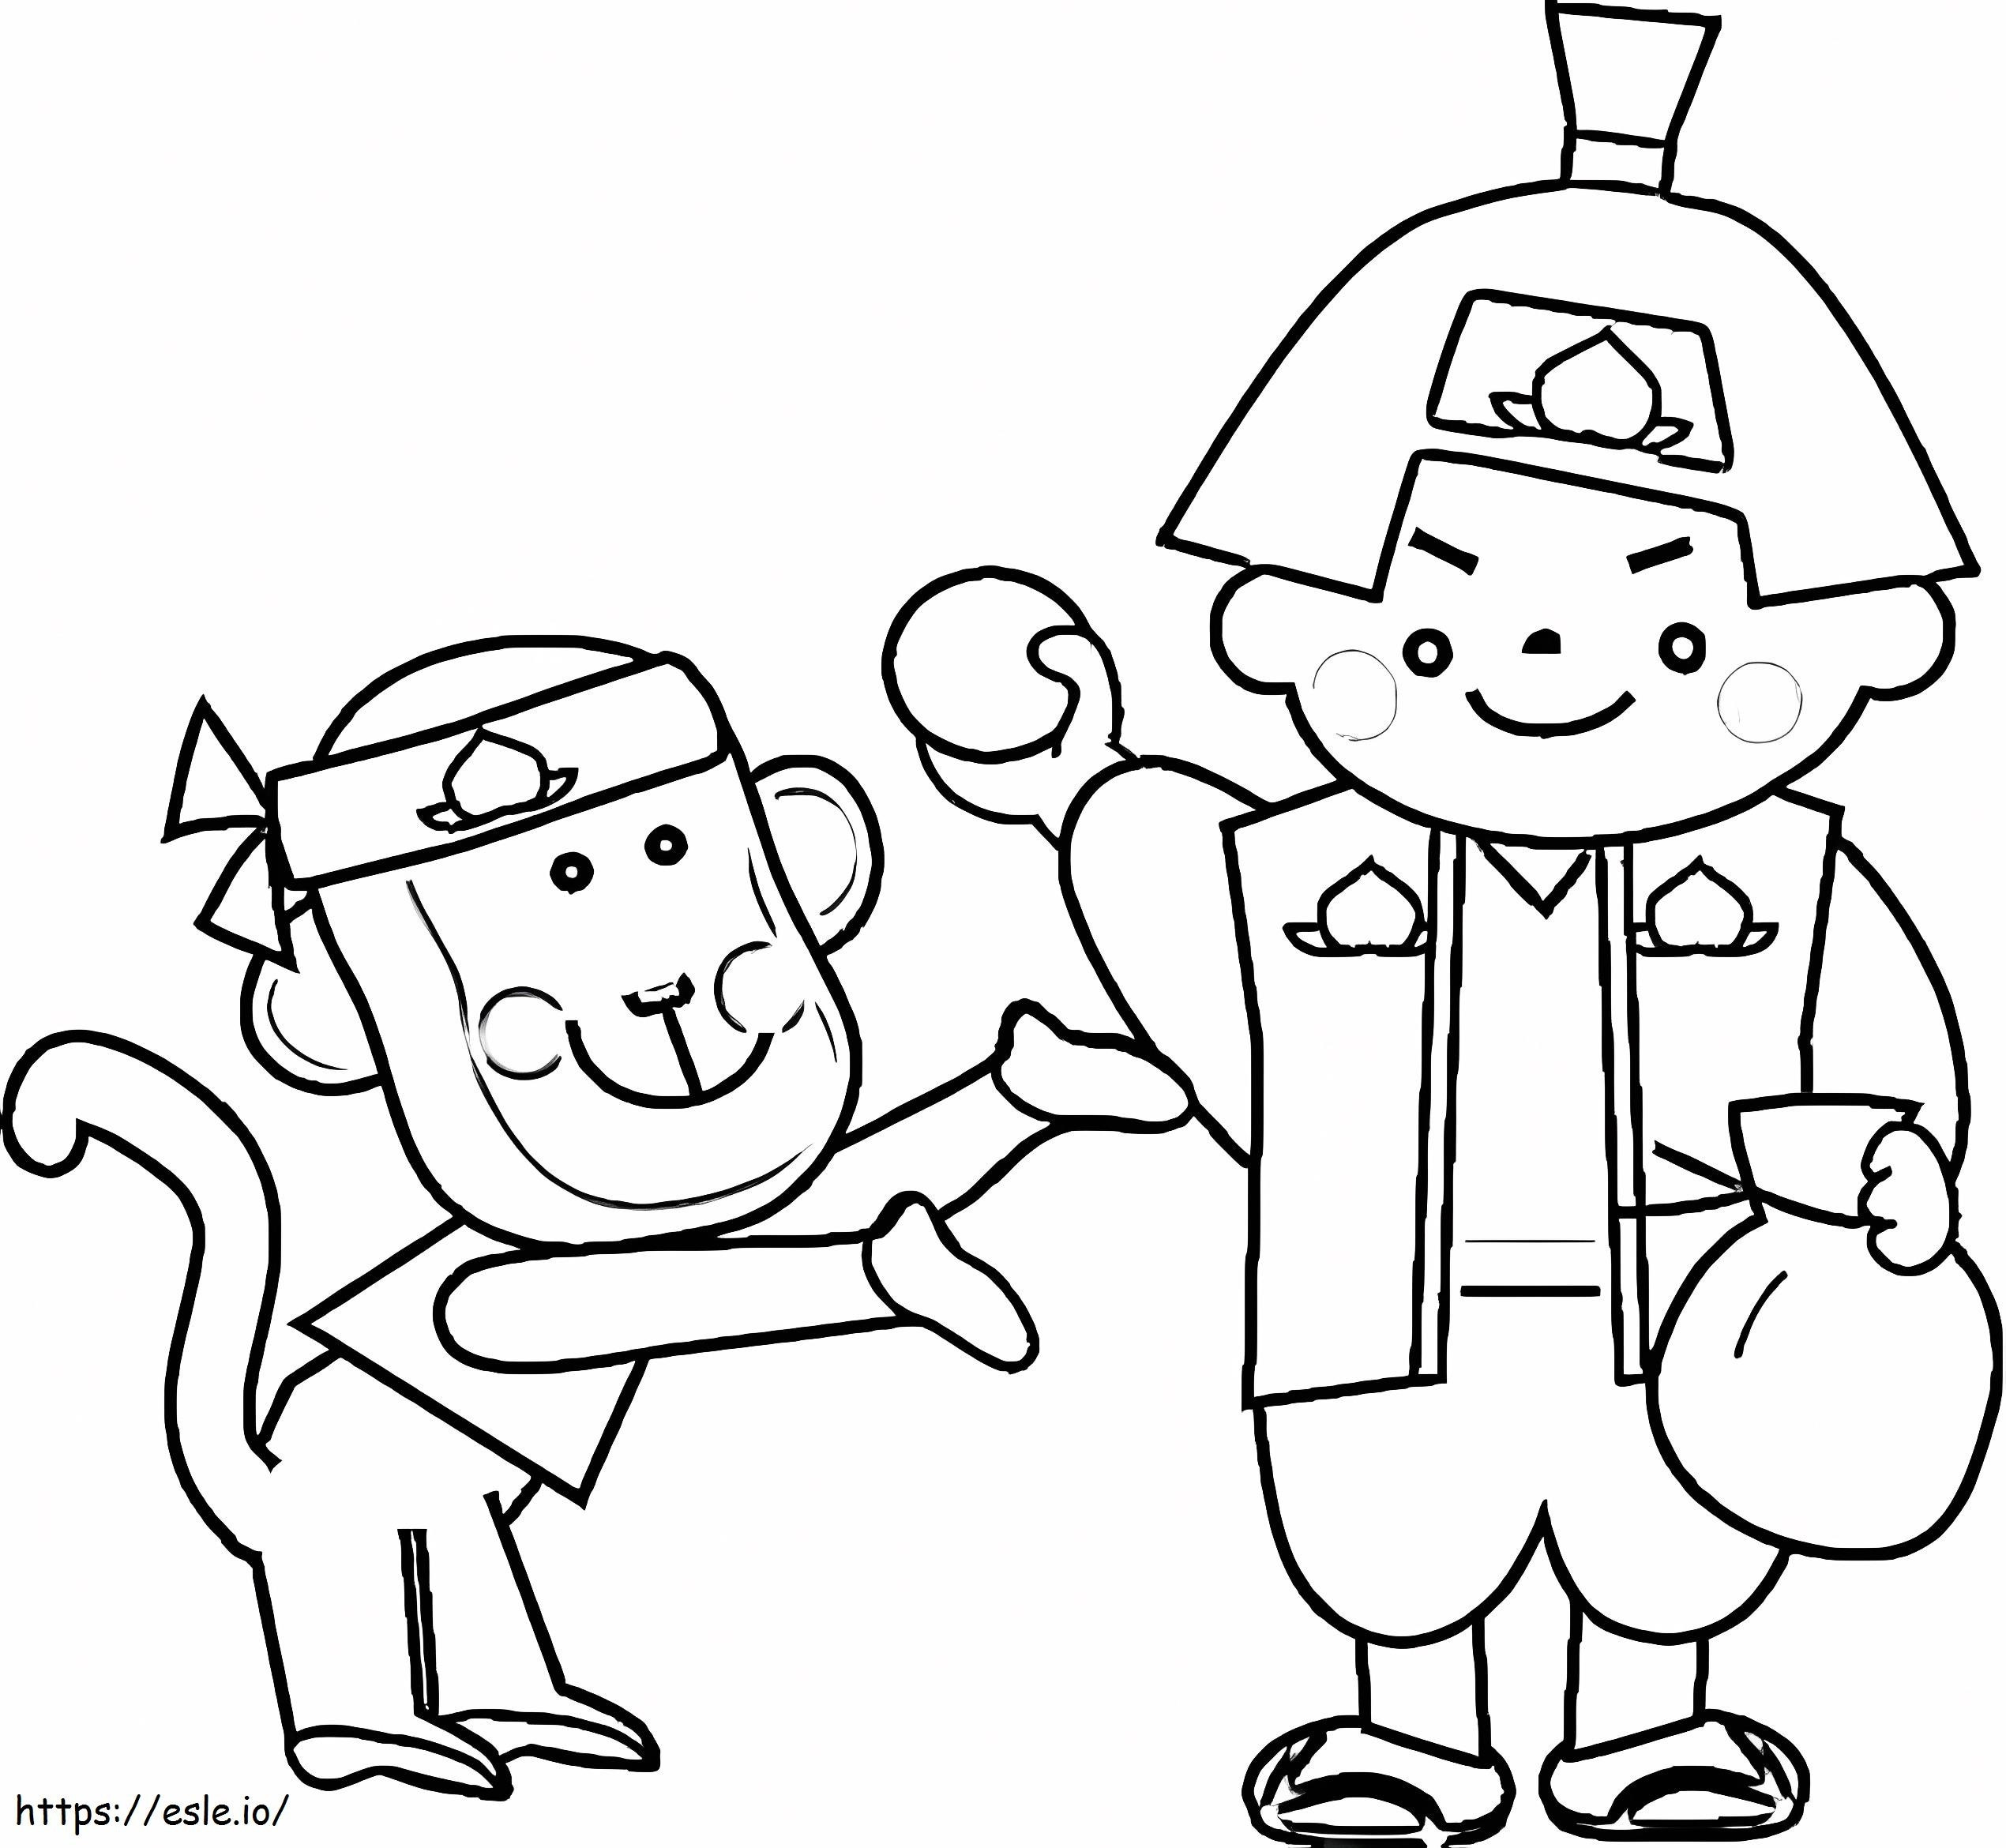 The Monkey And Momotaro coloring page